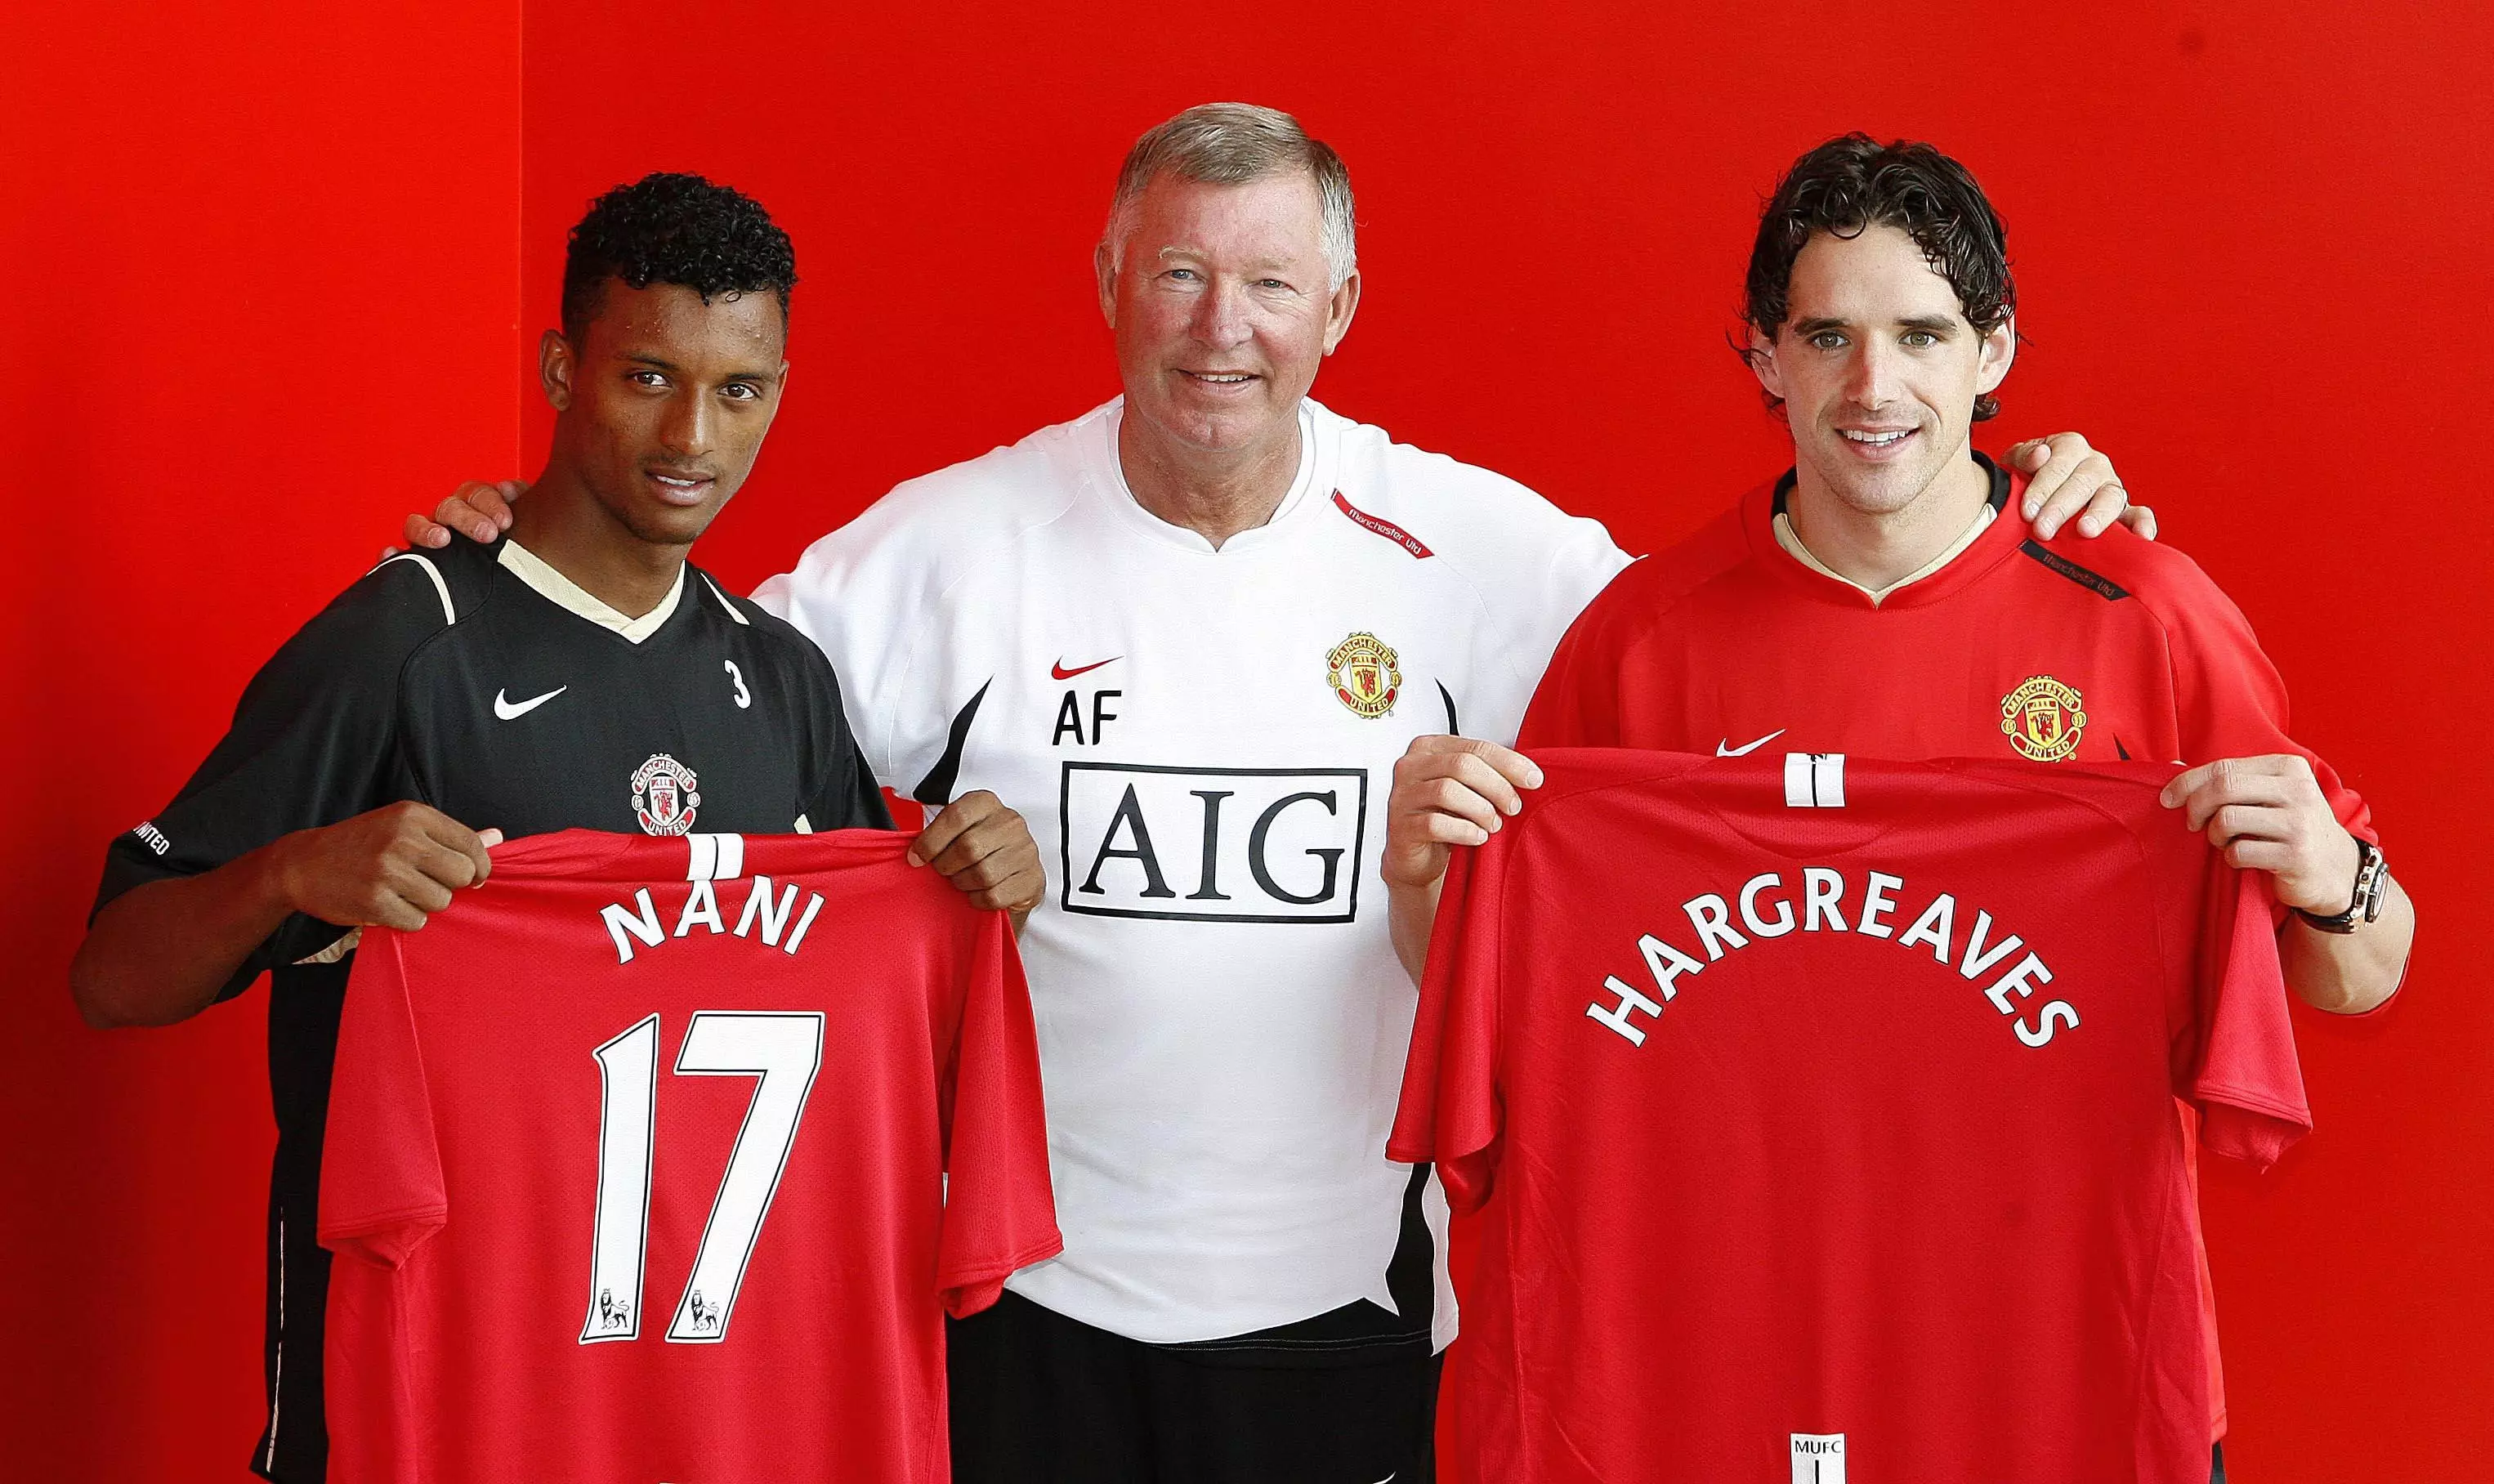 Hargreaves and Nani were essential to United's success. Image: PA Images